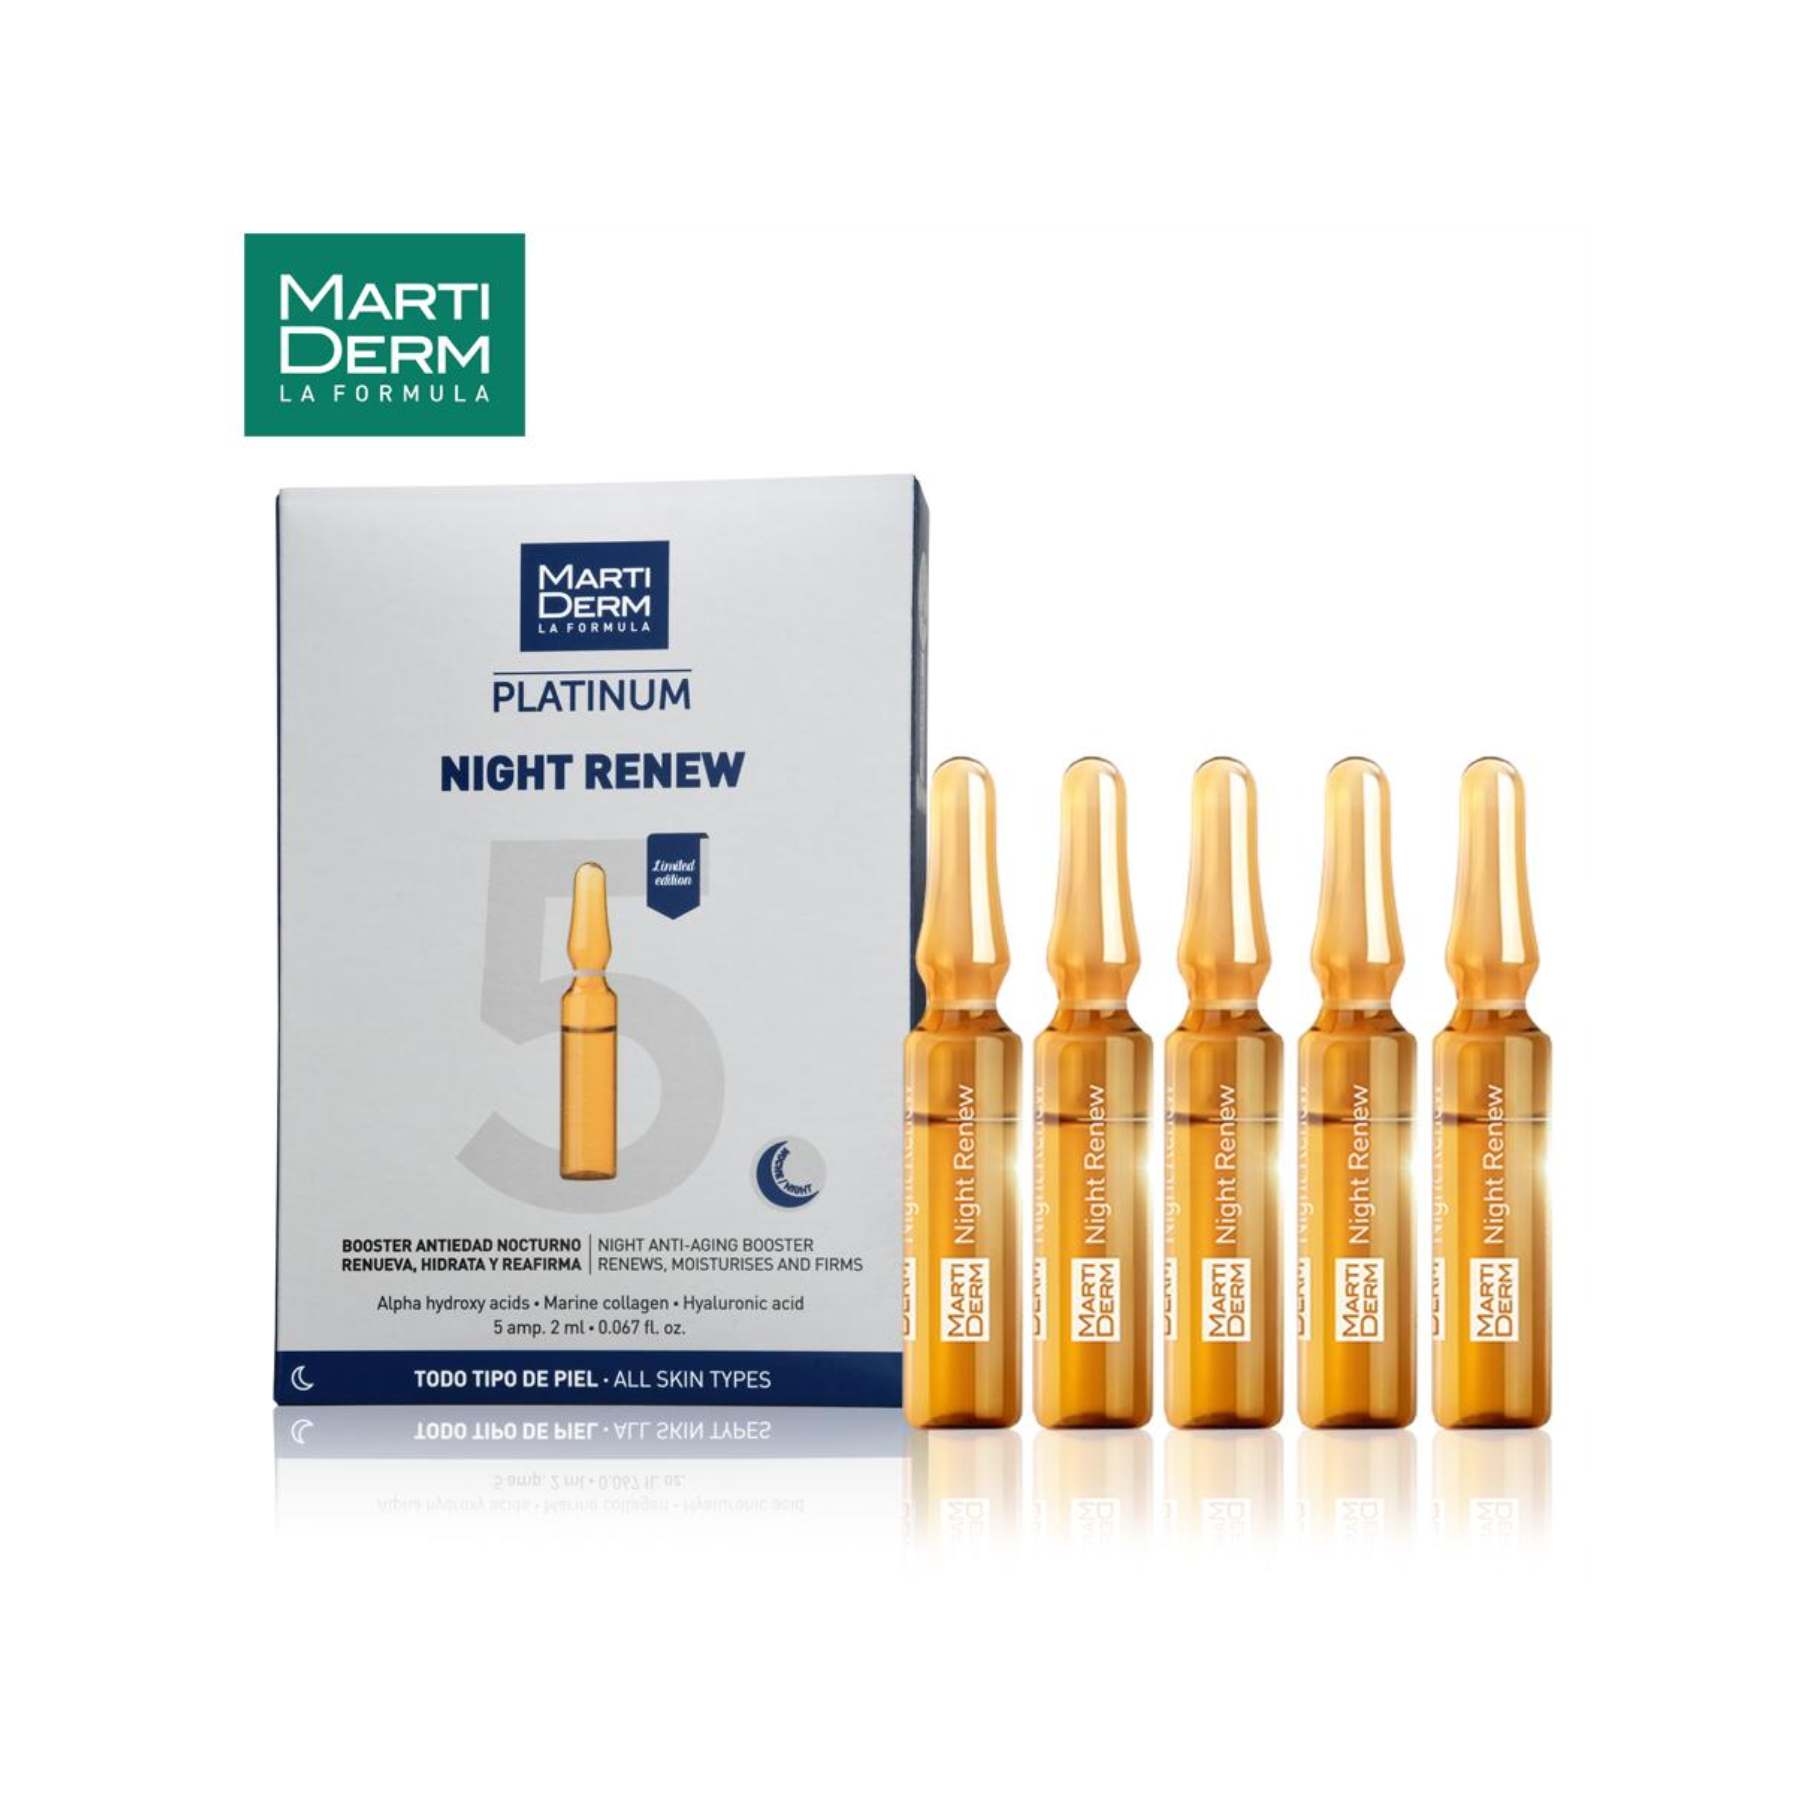 Shop Nigh Renew 10 Ampoules from Martiderm on SublimeLife.in. Best for leaving skin soft and even.